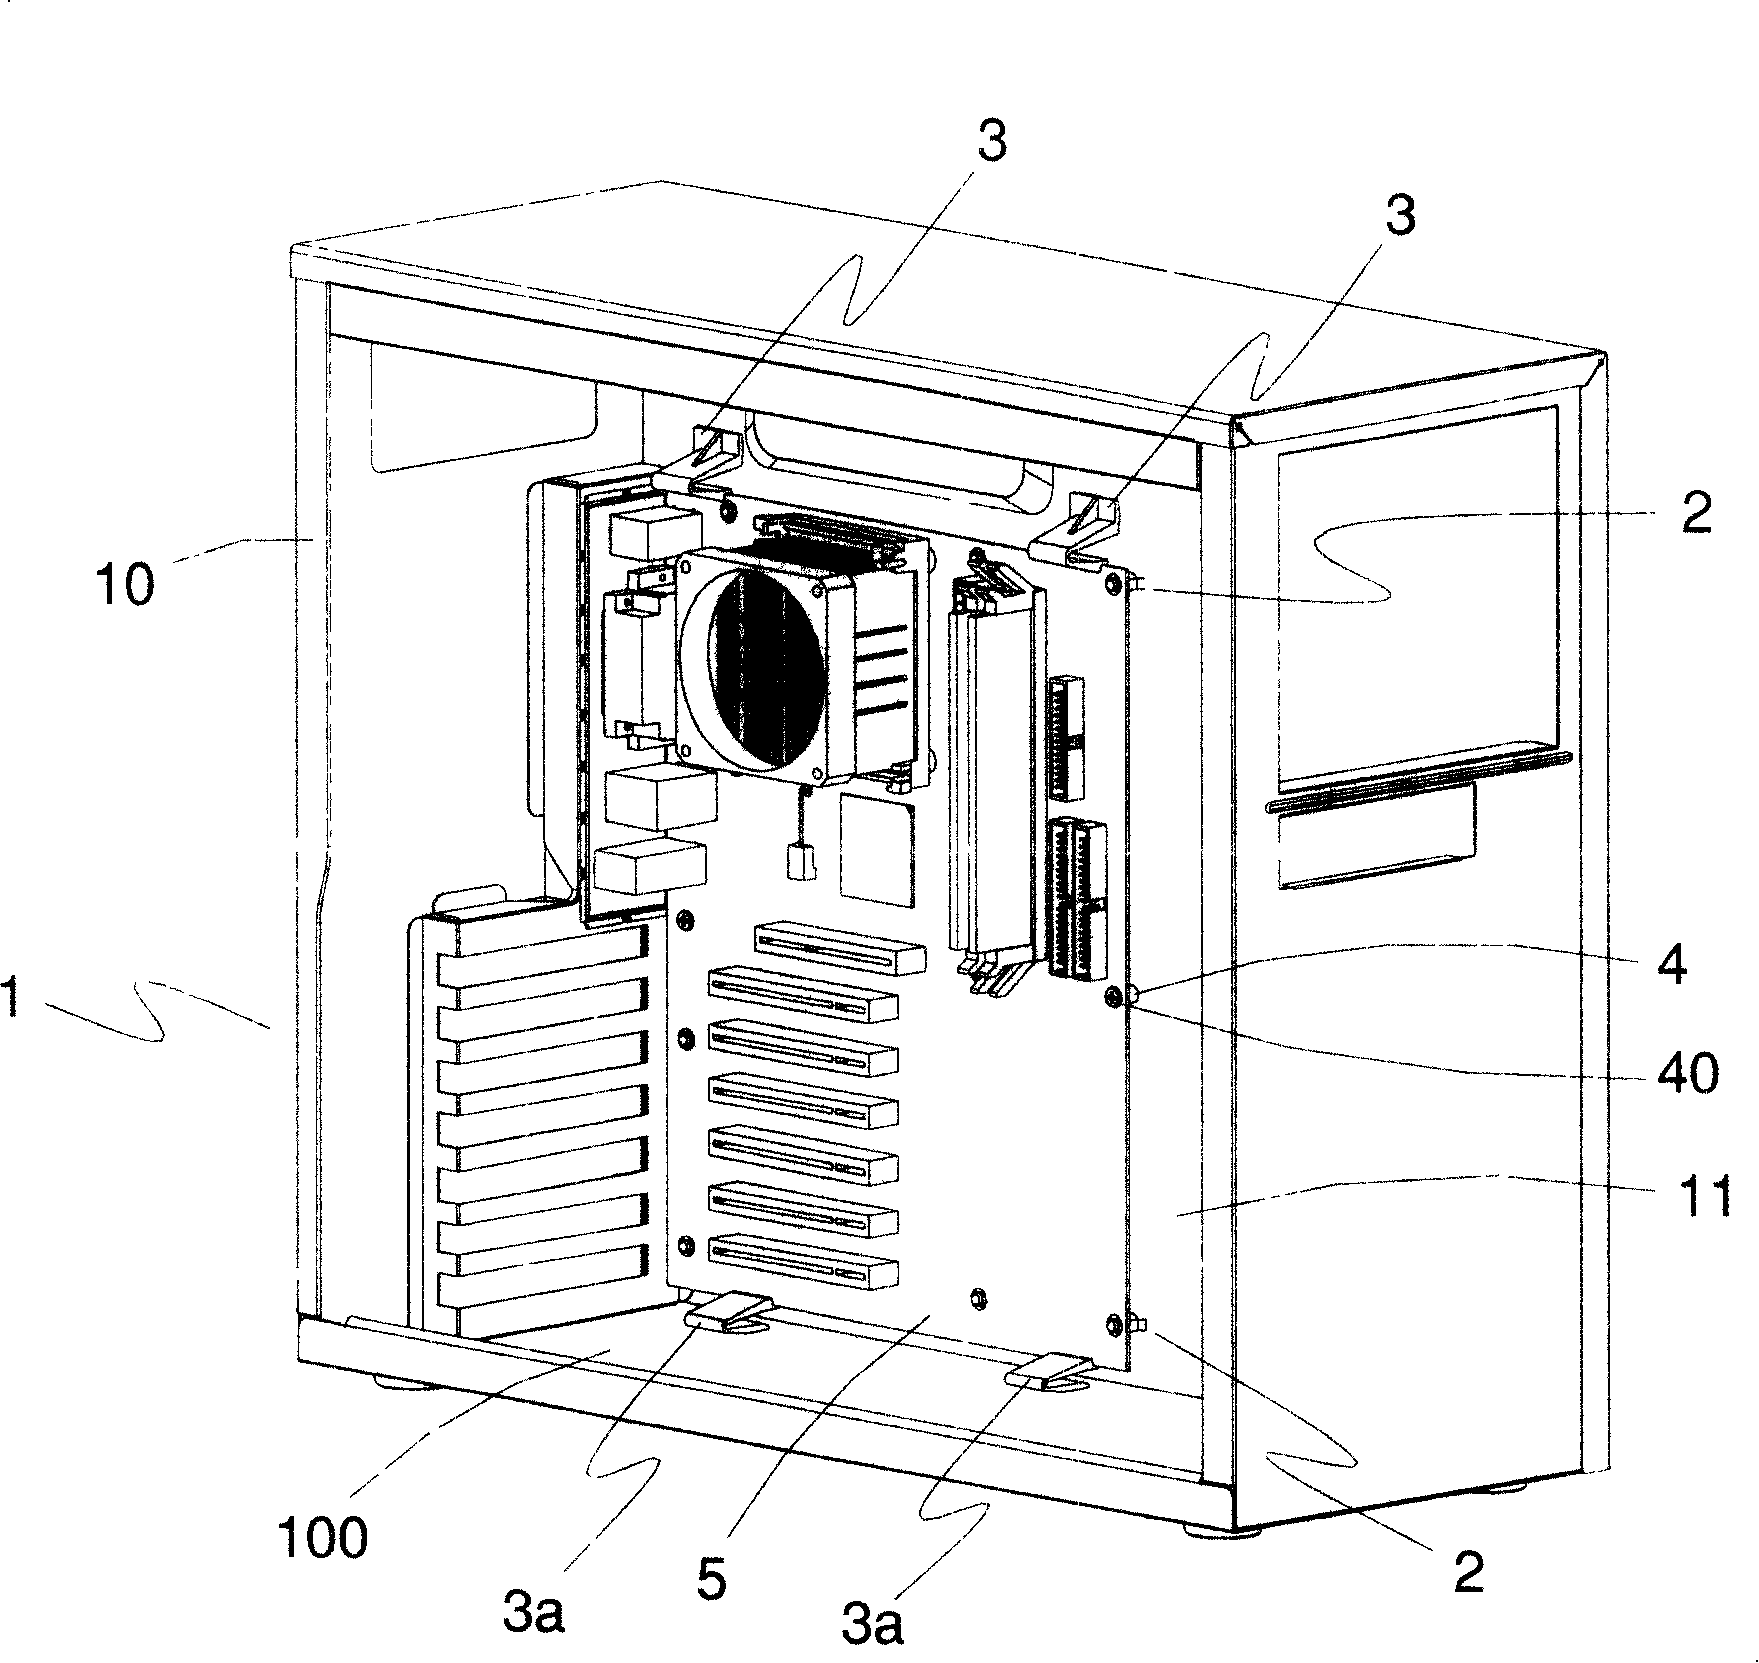 Circuit board assembly structure and its guide wave device